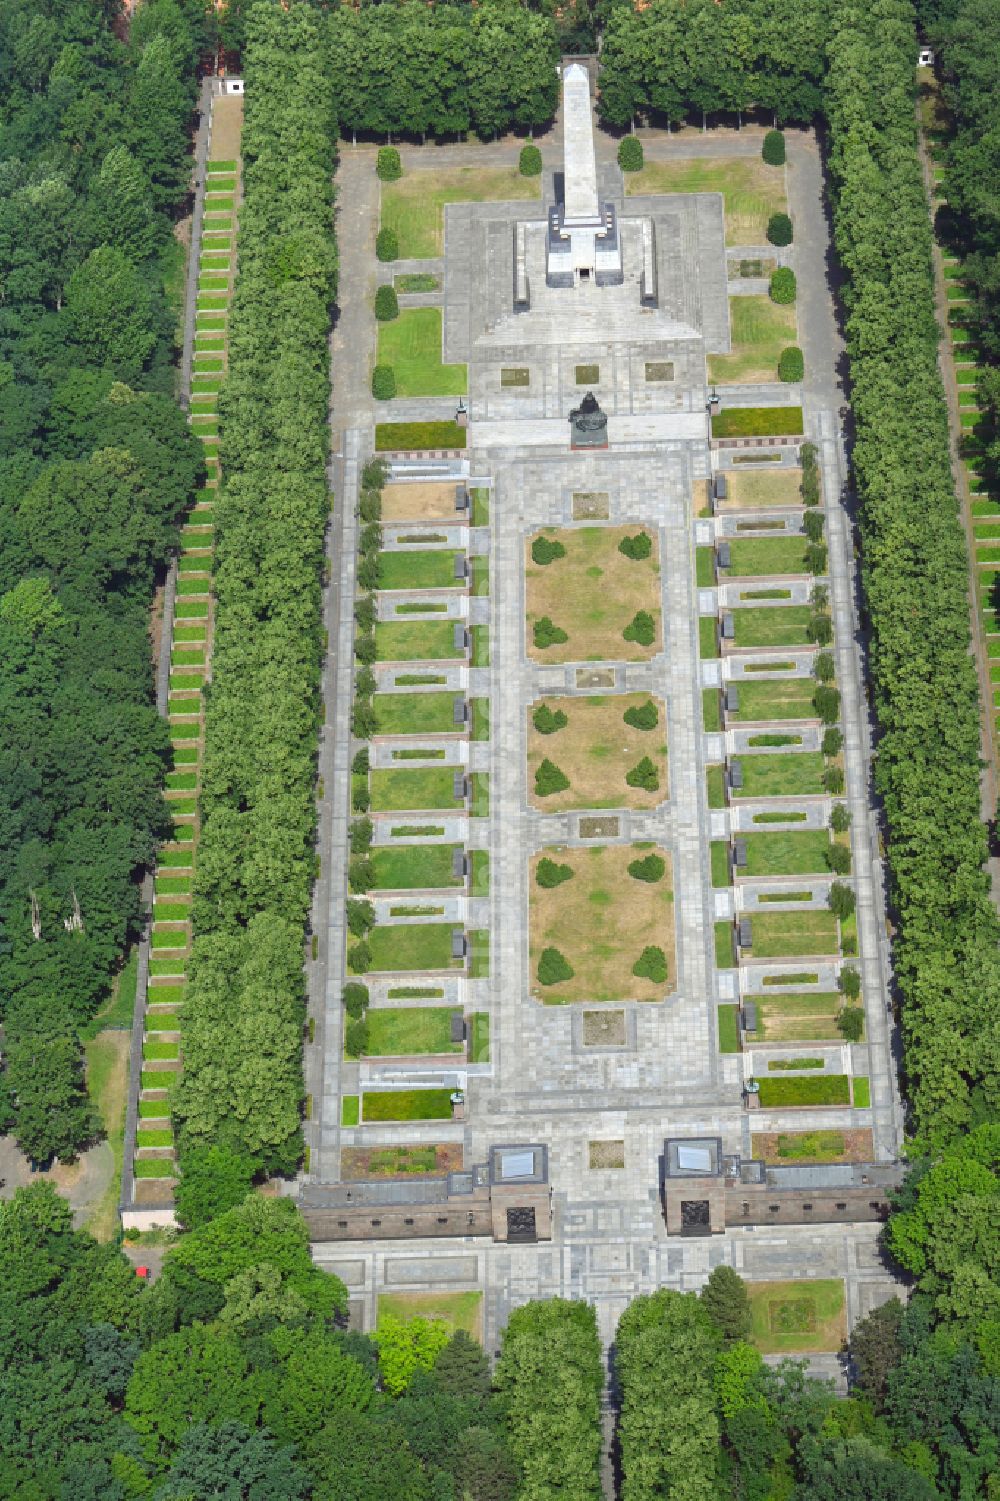 Aerial photograph Berlin - Sight and tourism attraction of the historical monument Soviet - Russian memorial in the park of Schoenholzer Heide on Germanenstrasse in the district Wilhelmsruh in Berlin, Germany